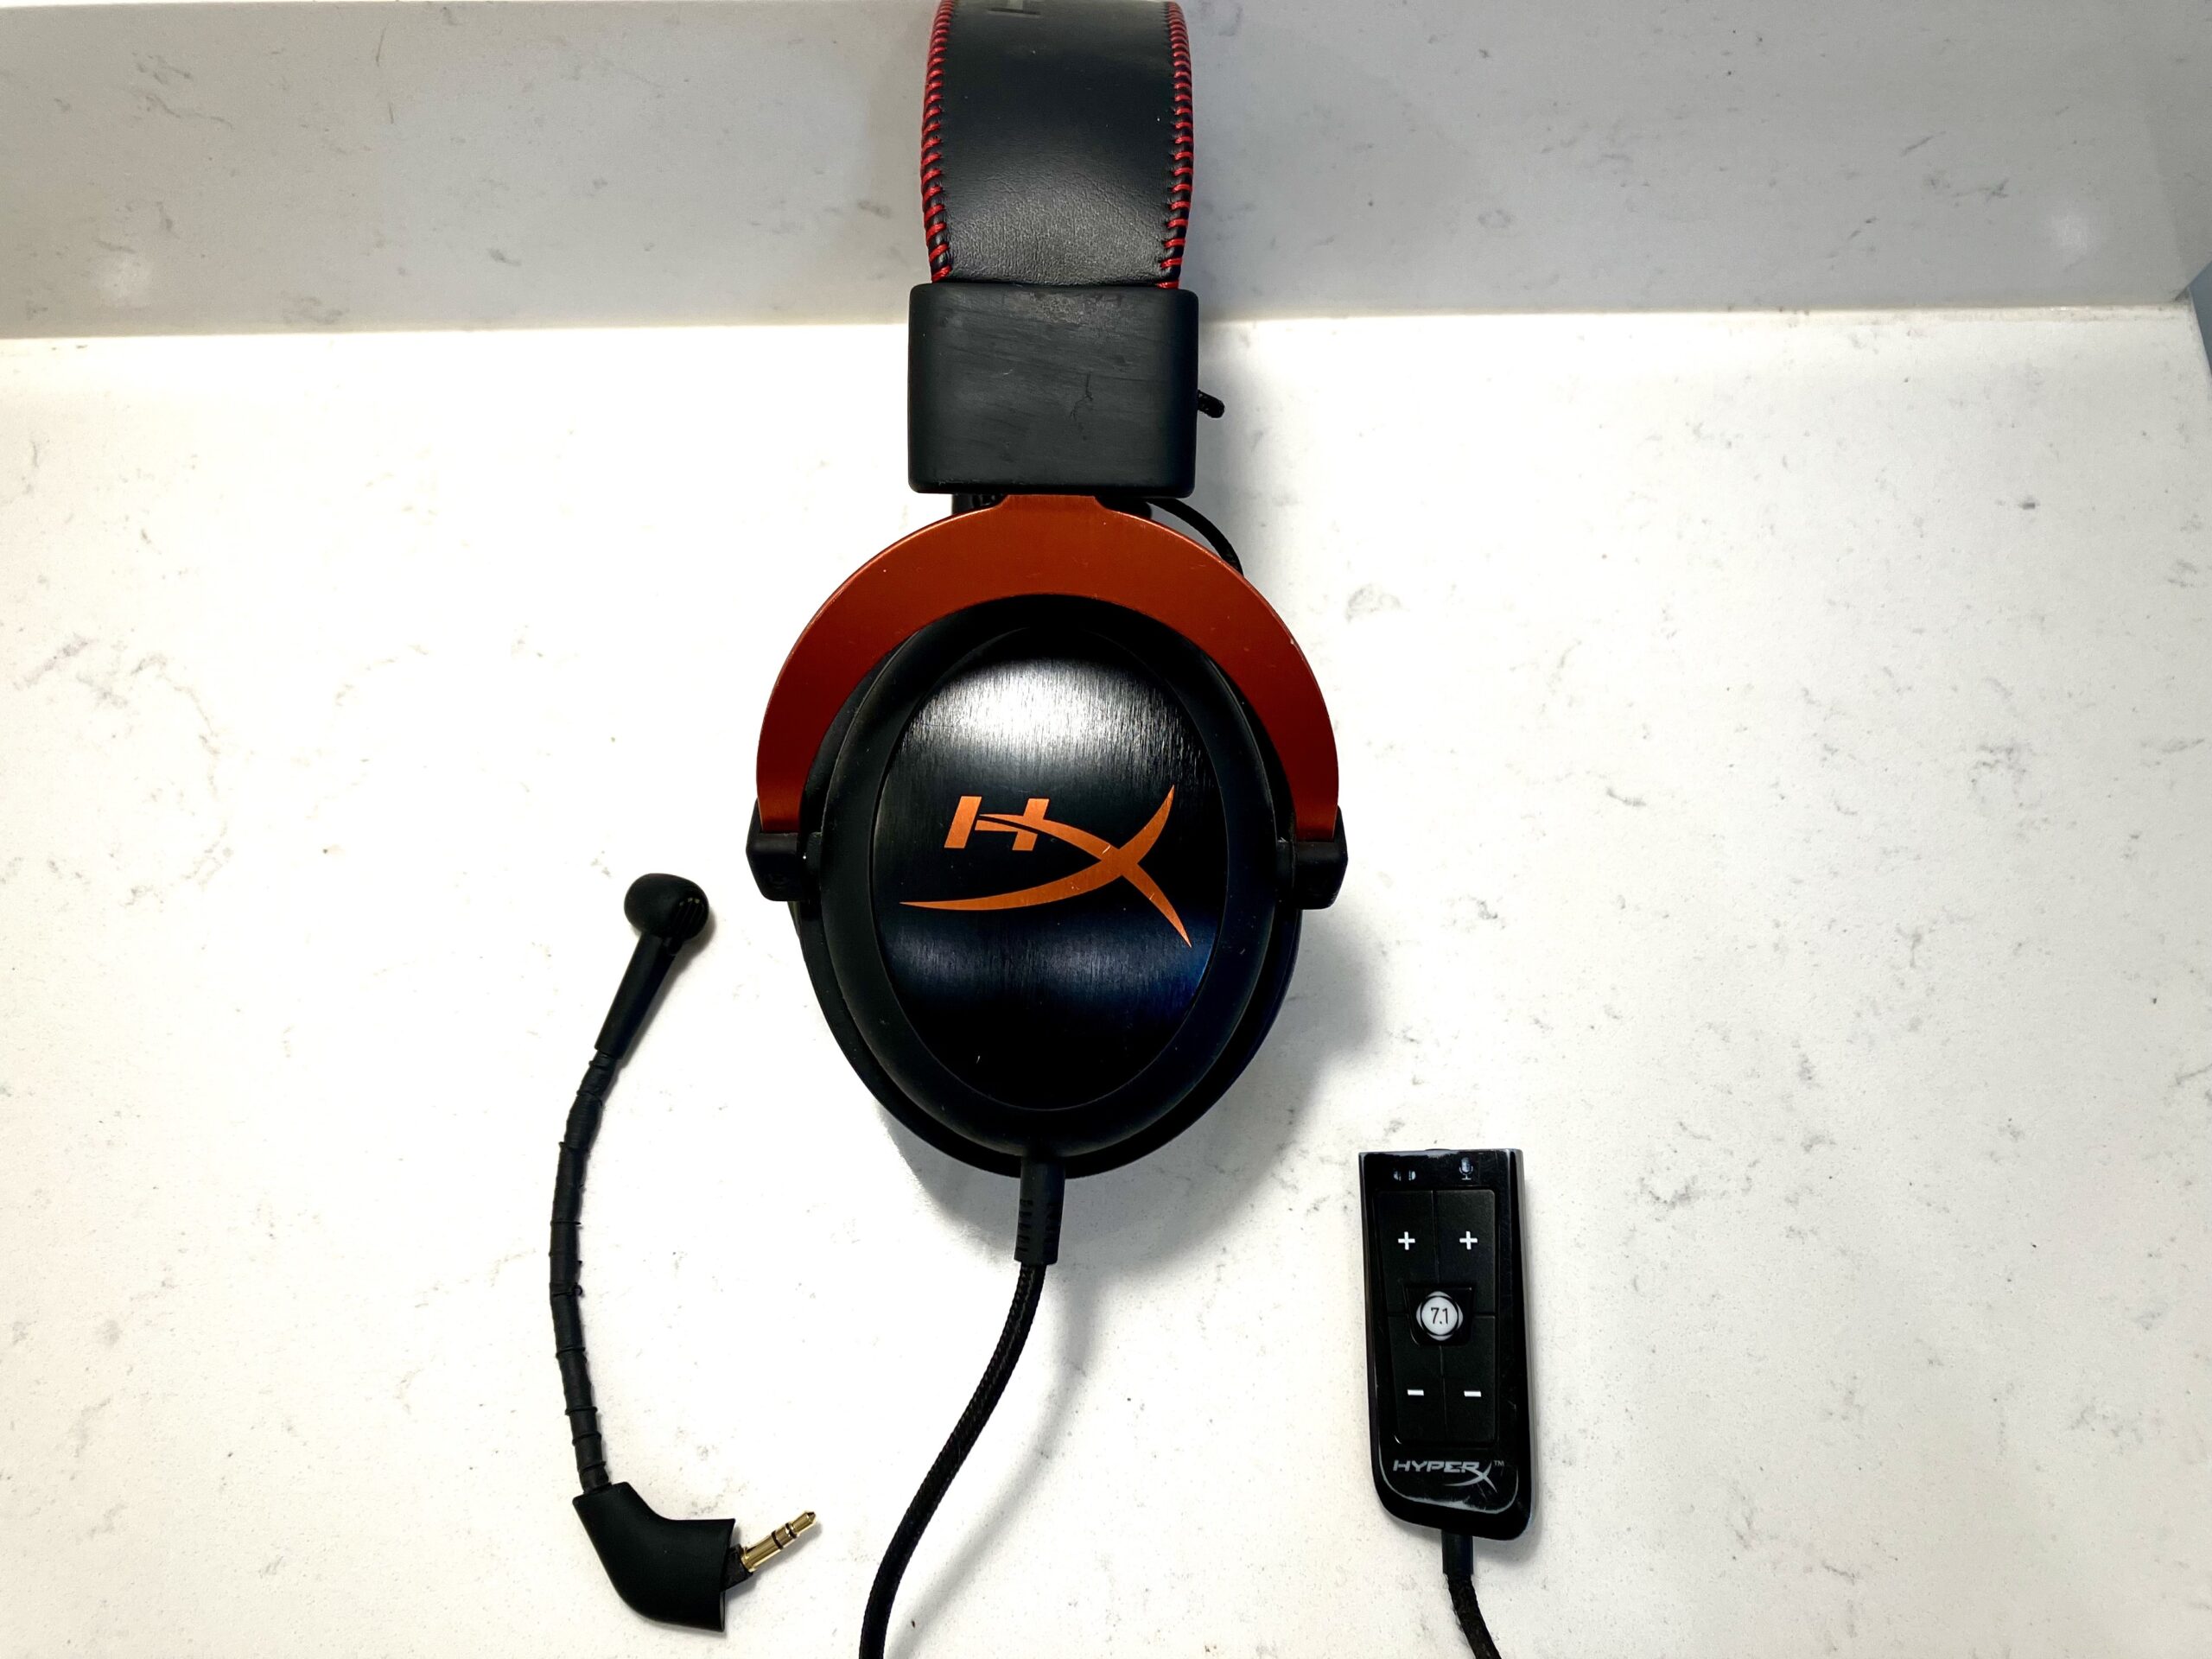 Gaming Review: HyperX Cloud II - Tried, True, and Reliable